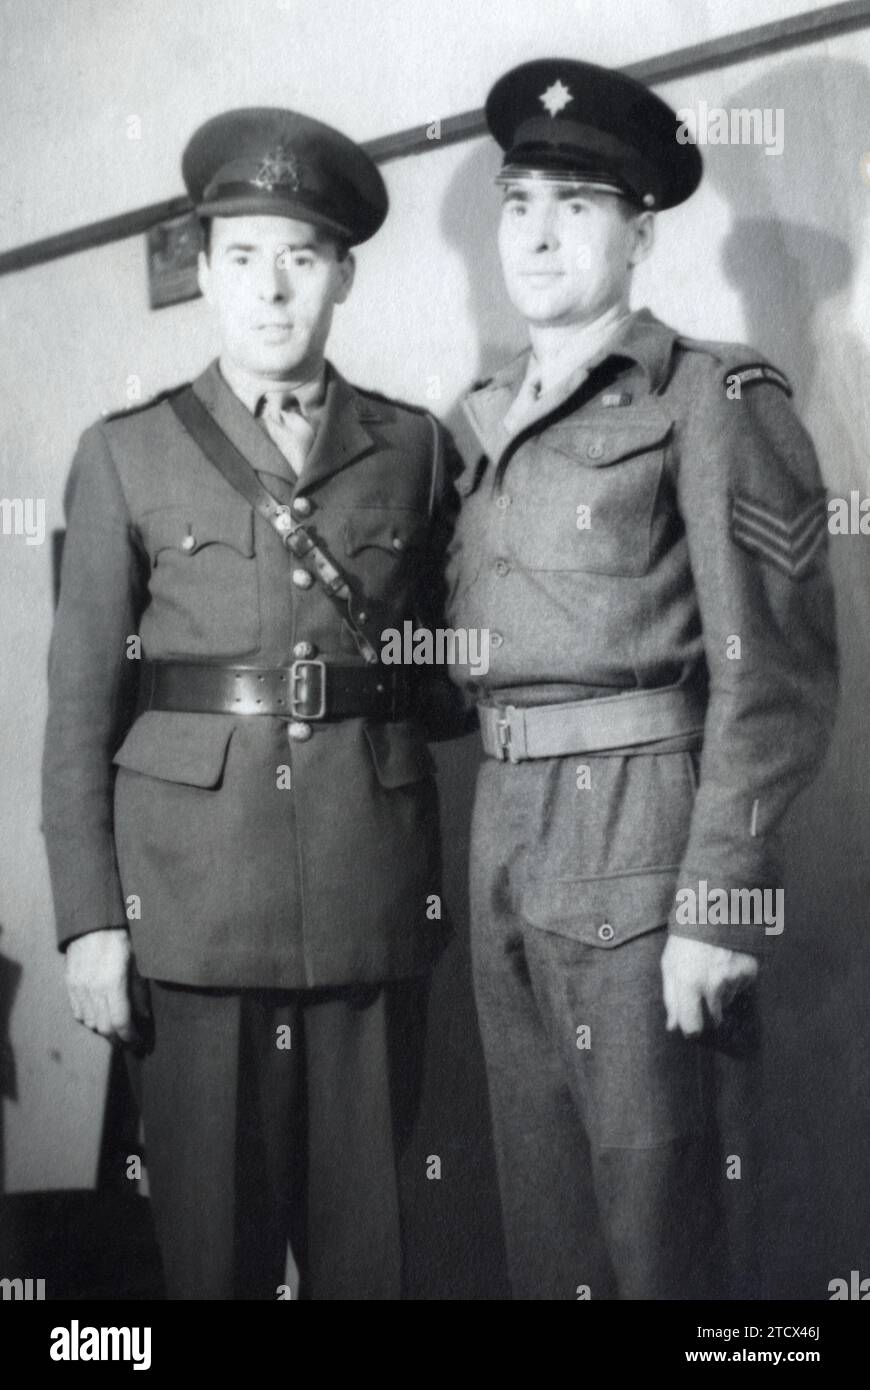 A British army General Service Corps Officer with an Irish Guards sergeant, taken in Germany, c. 1945-1946. Stock Photo